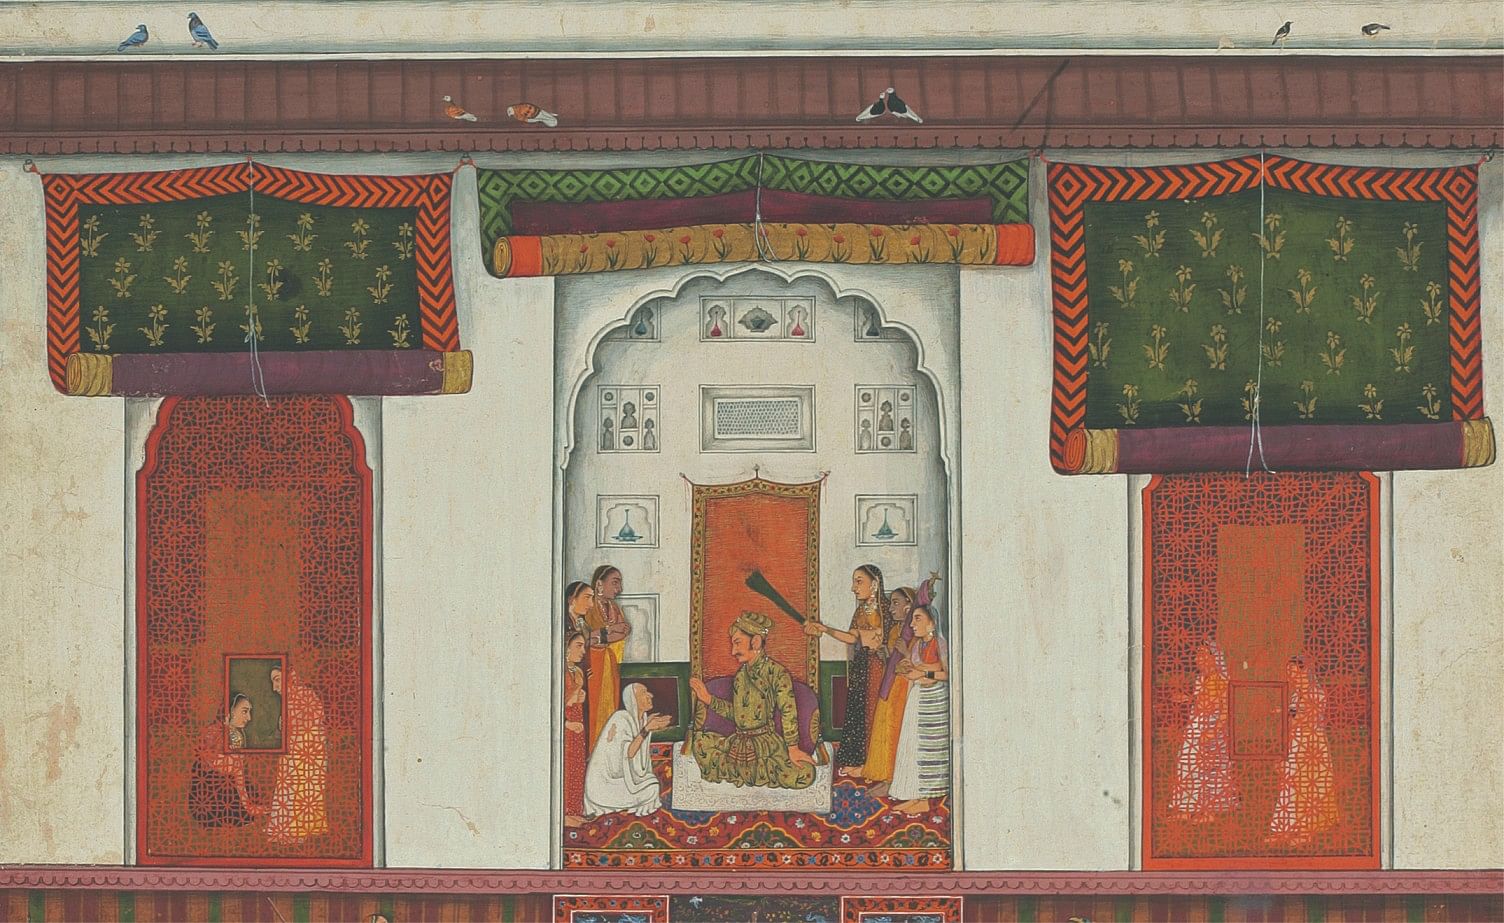 FIG. 1 Raja Kansa listens to the prophecy of an old duenna, folio (detail) from Bhagavata Purana series, Mandi, c. 1635–50 | Image credit: Private collection